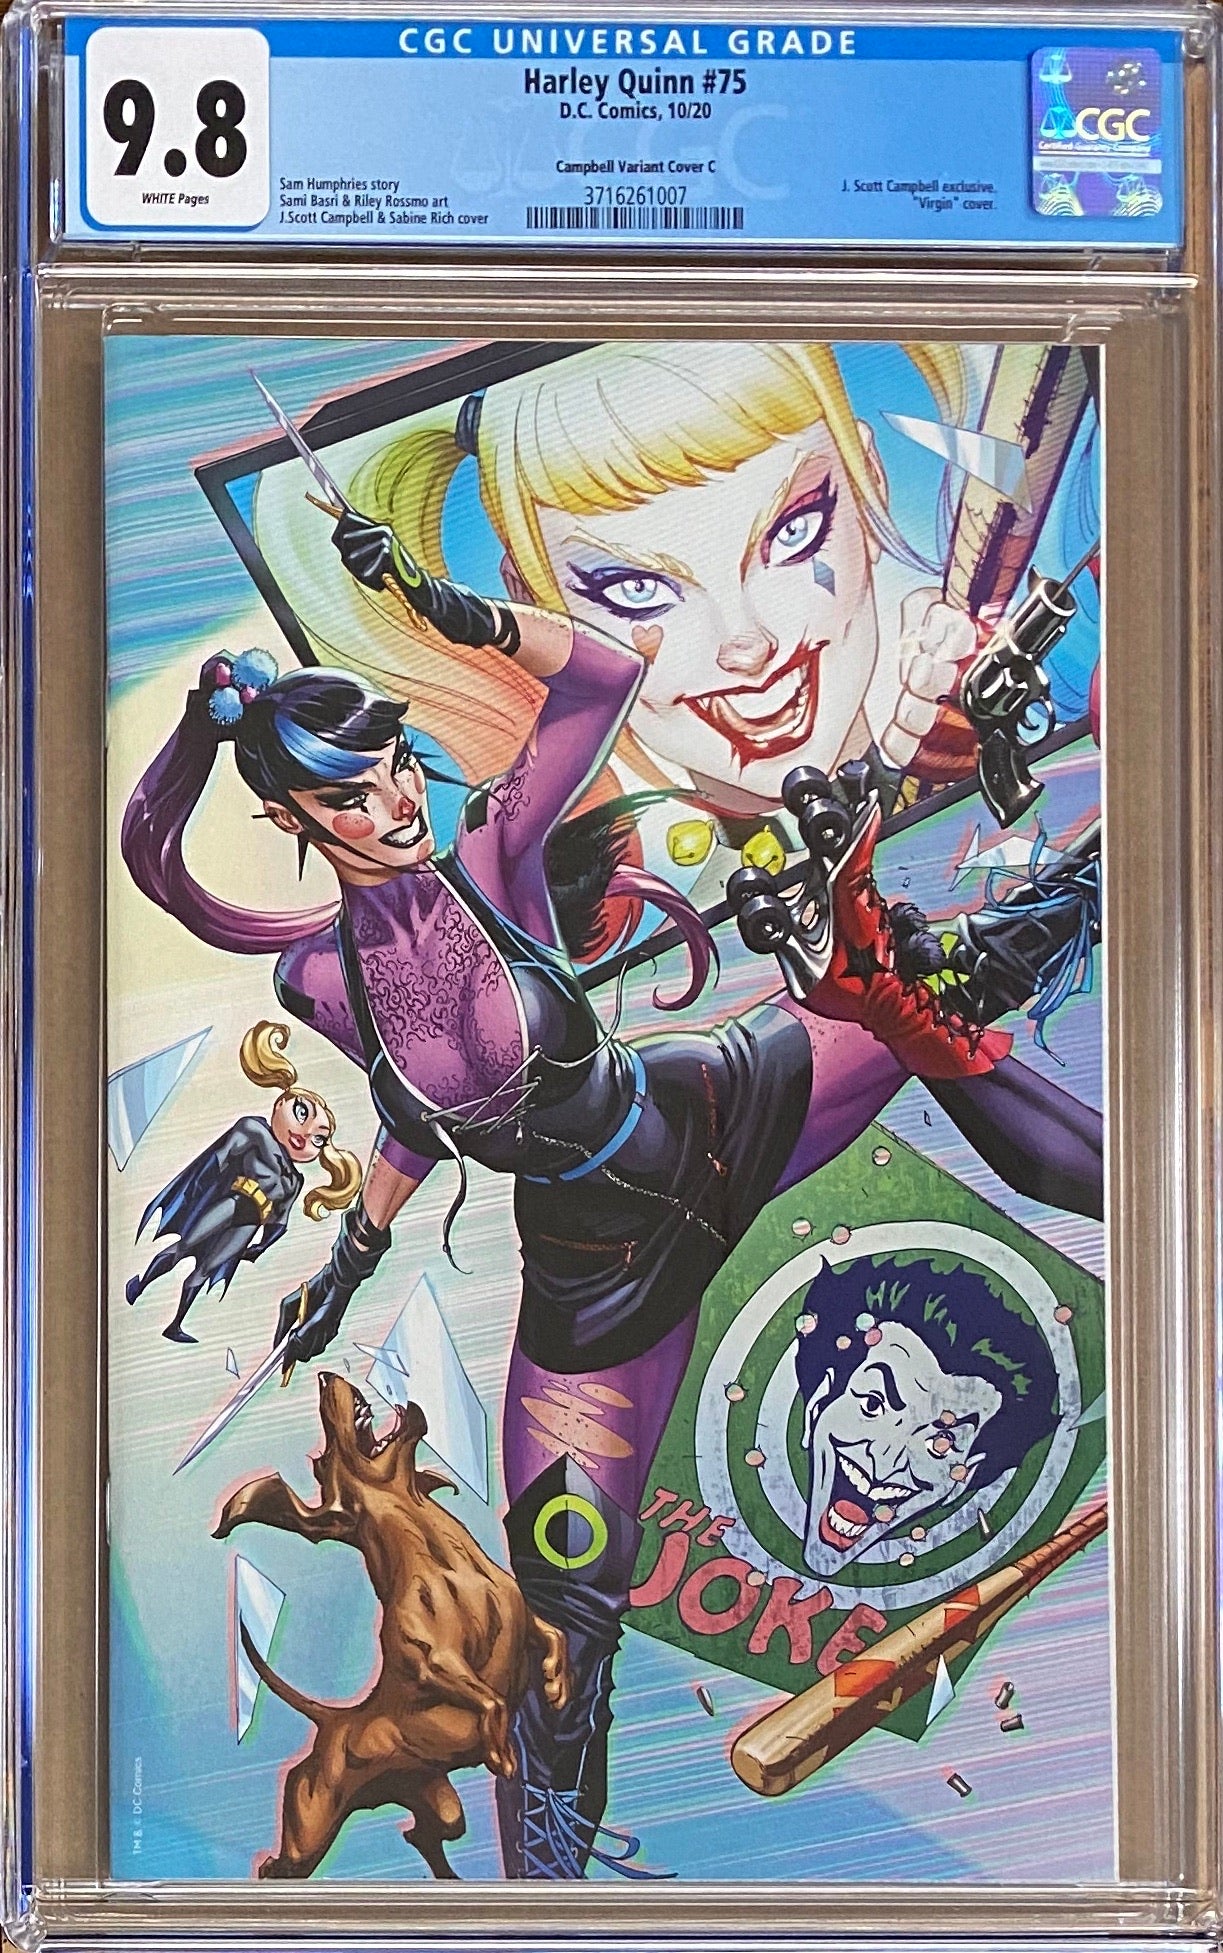 Harley Quinn #75 J. Scott Campbell Exclusive C - "Punchline (connecting)" CGC 9.8